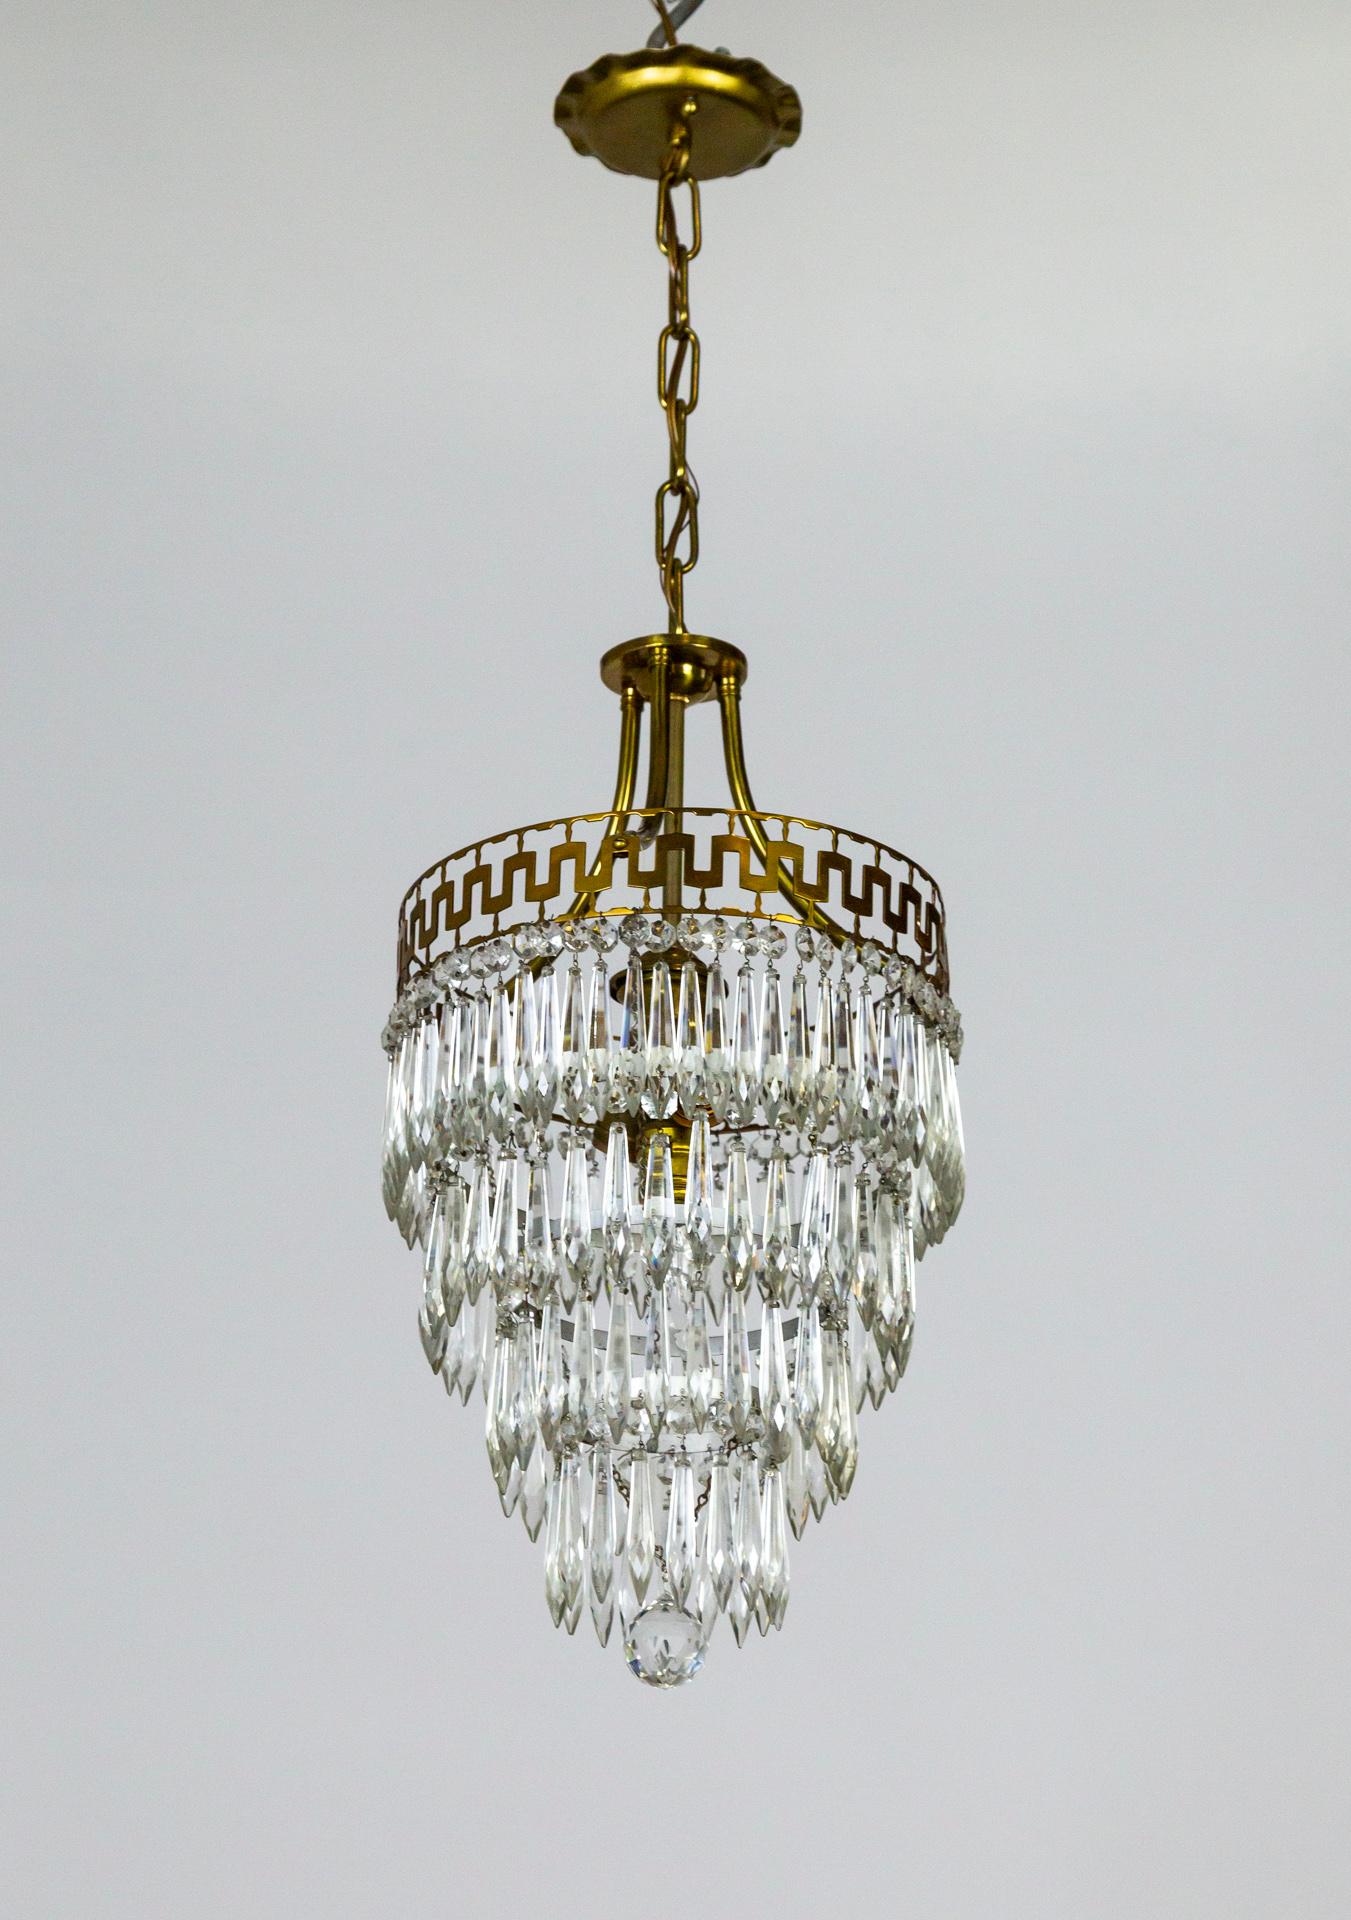 20th Century Mid-20th Cent. Neoclassical Cut Brass & Crystal Wedding Cake Pendant Light For Sale